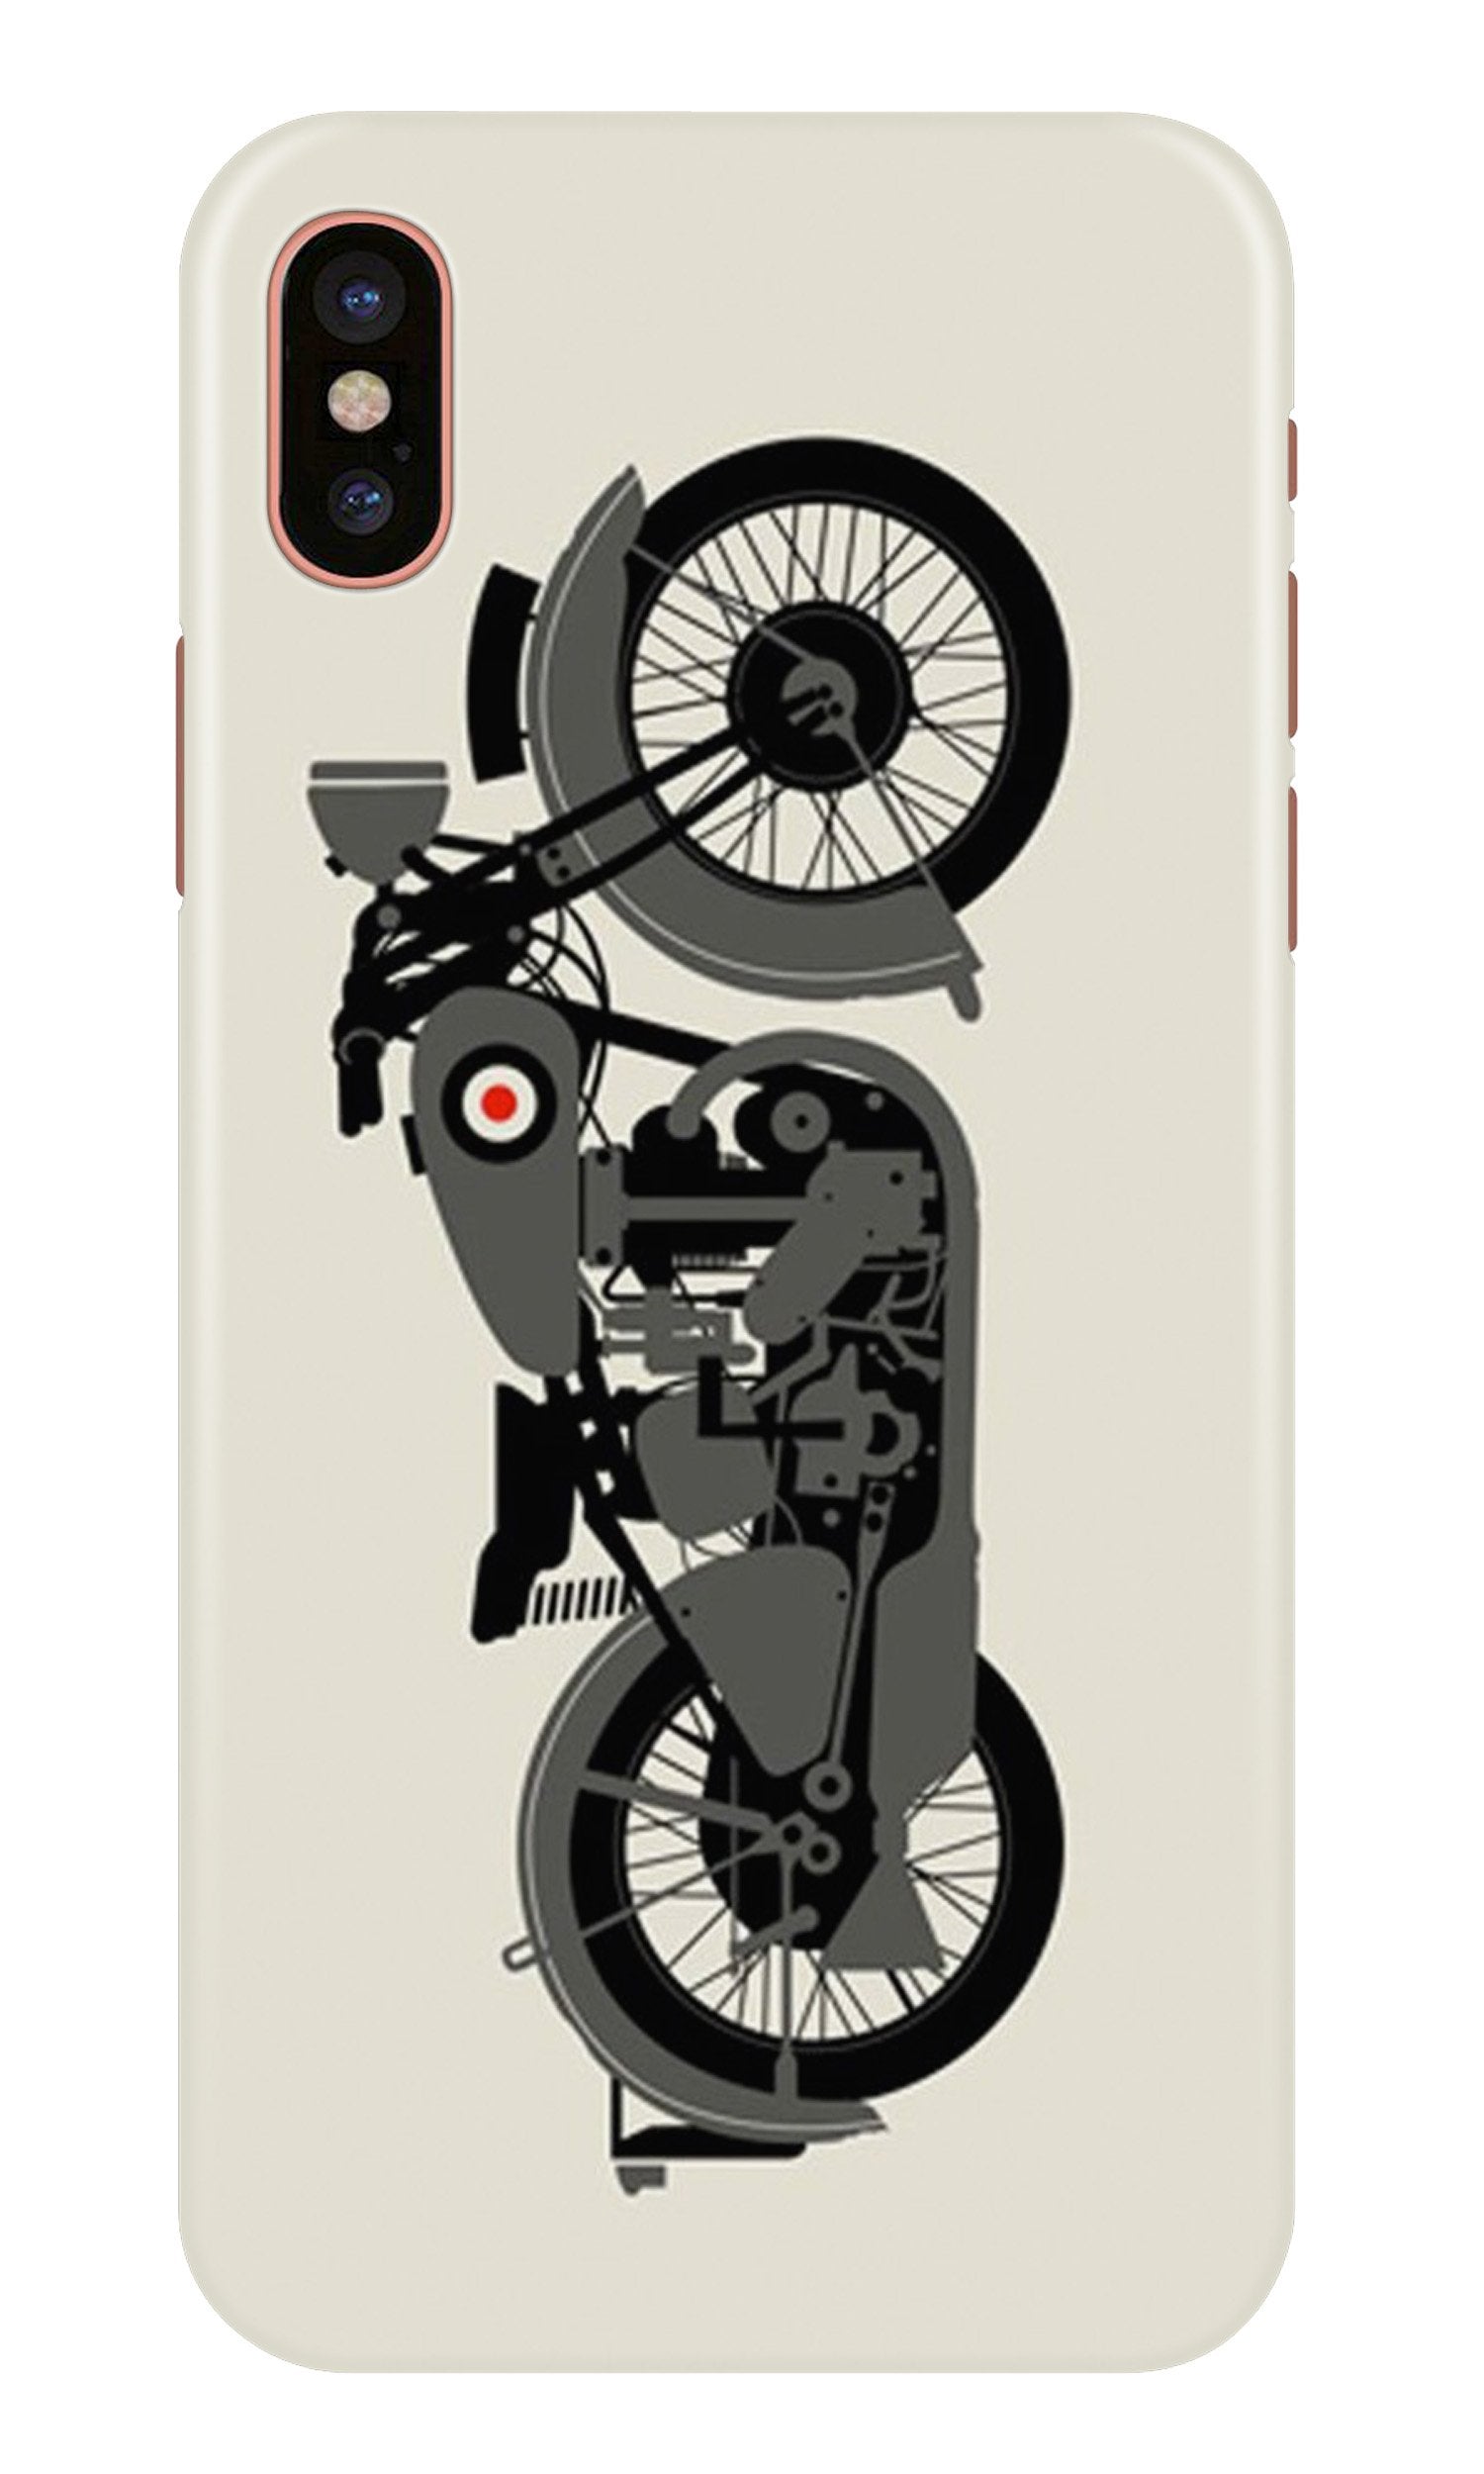 MotorCycle Case for iPhone X (Design No. 259)